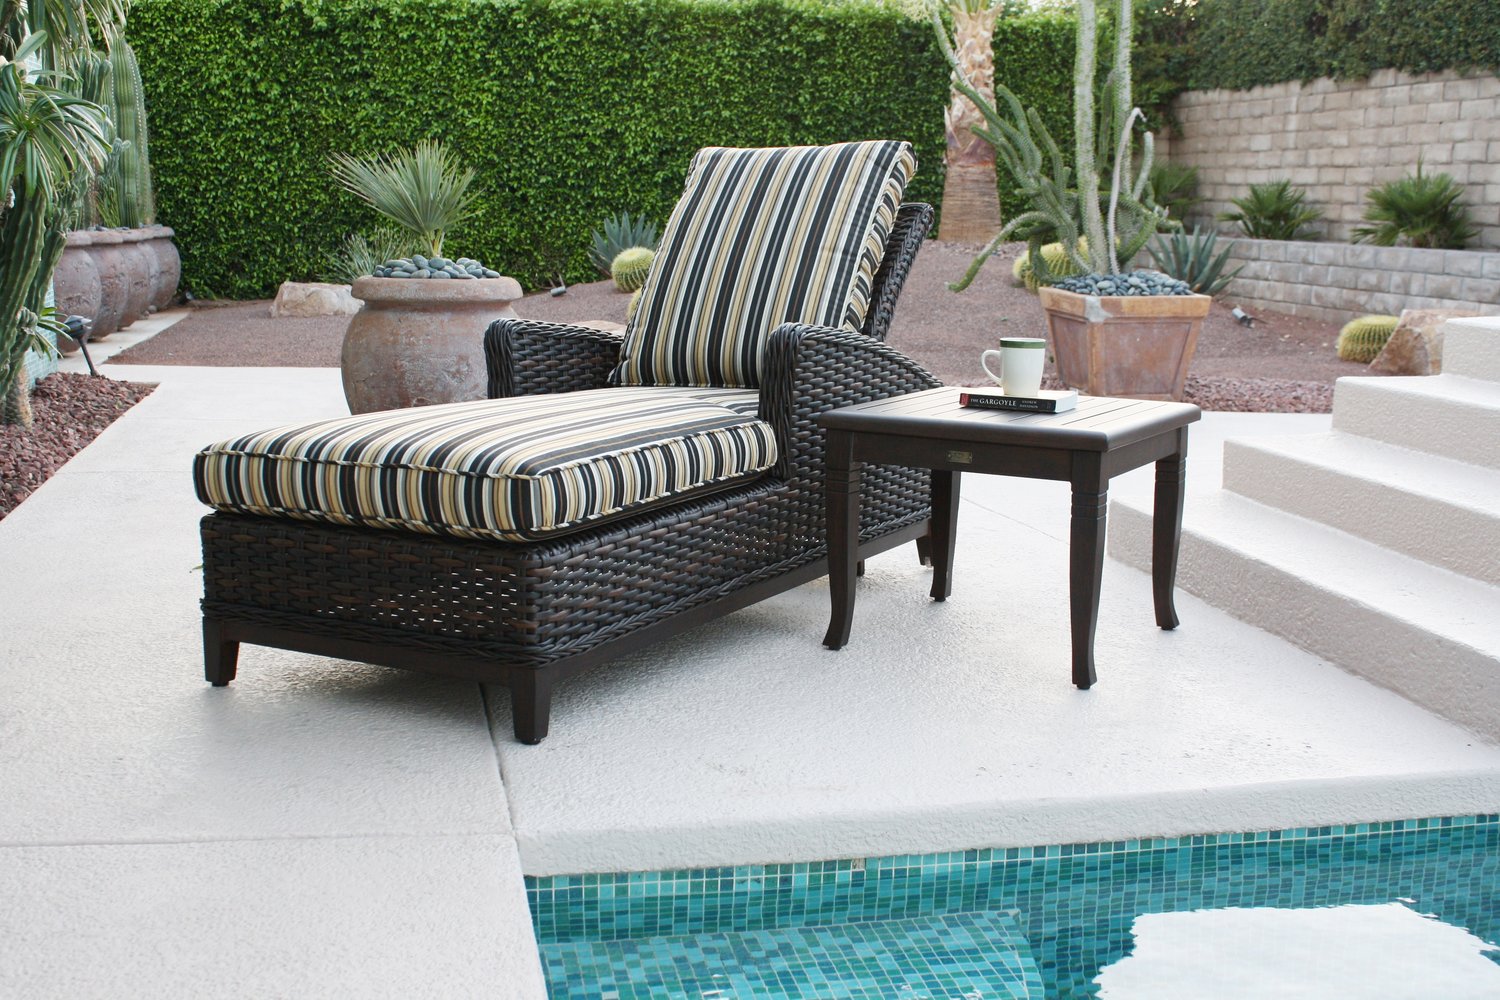 Catalina Single Adjustable Chaise by Patio Renaissance